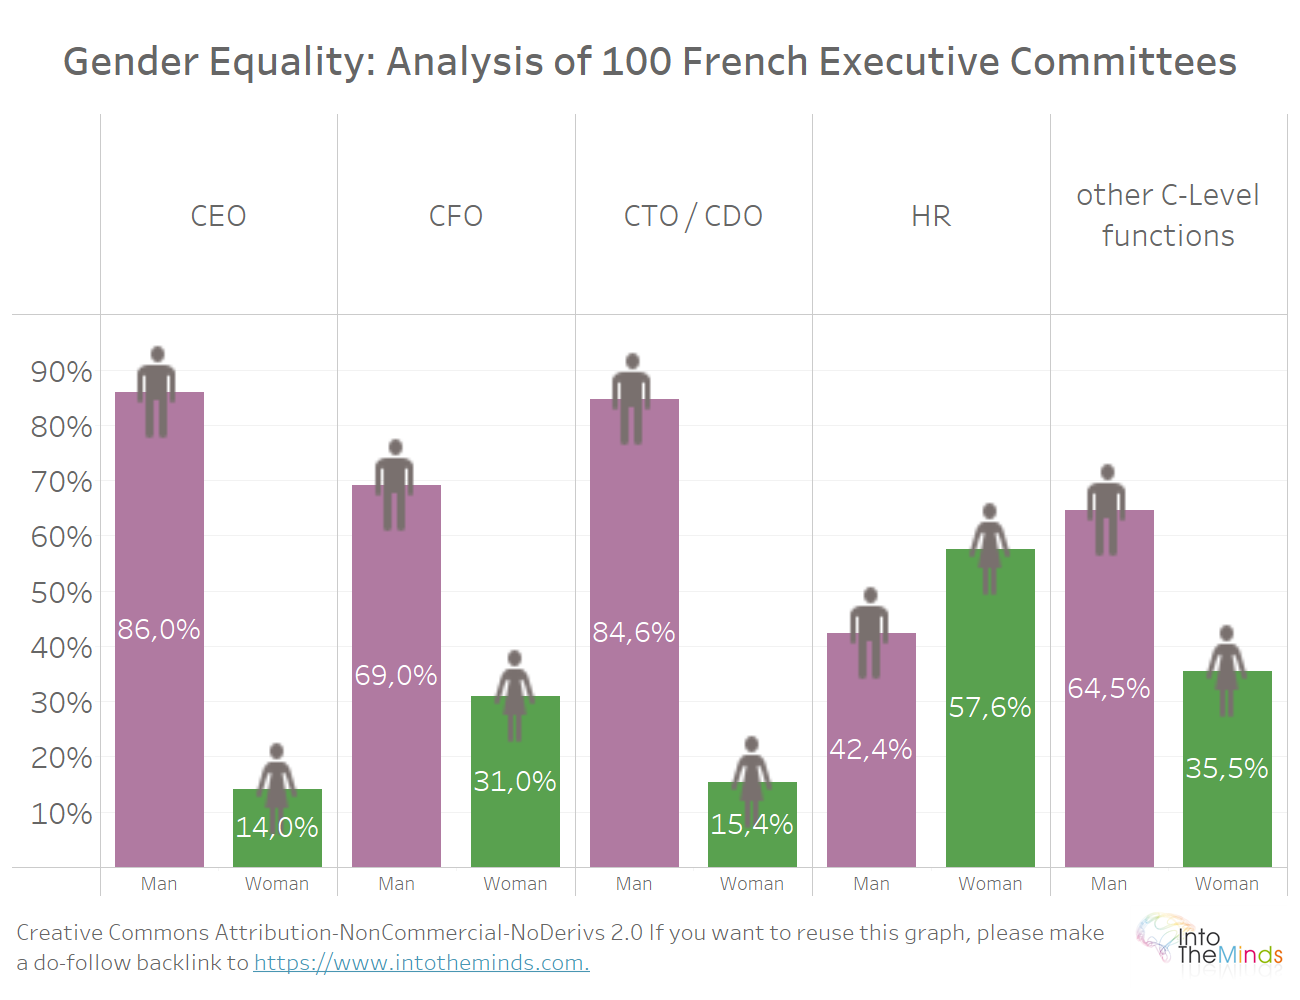 Diversity of French management committees